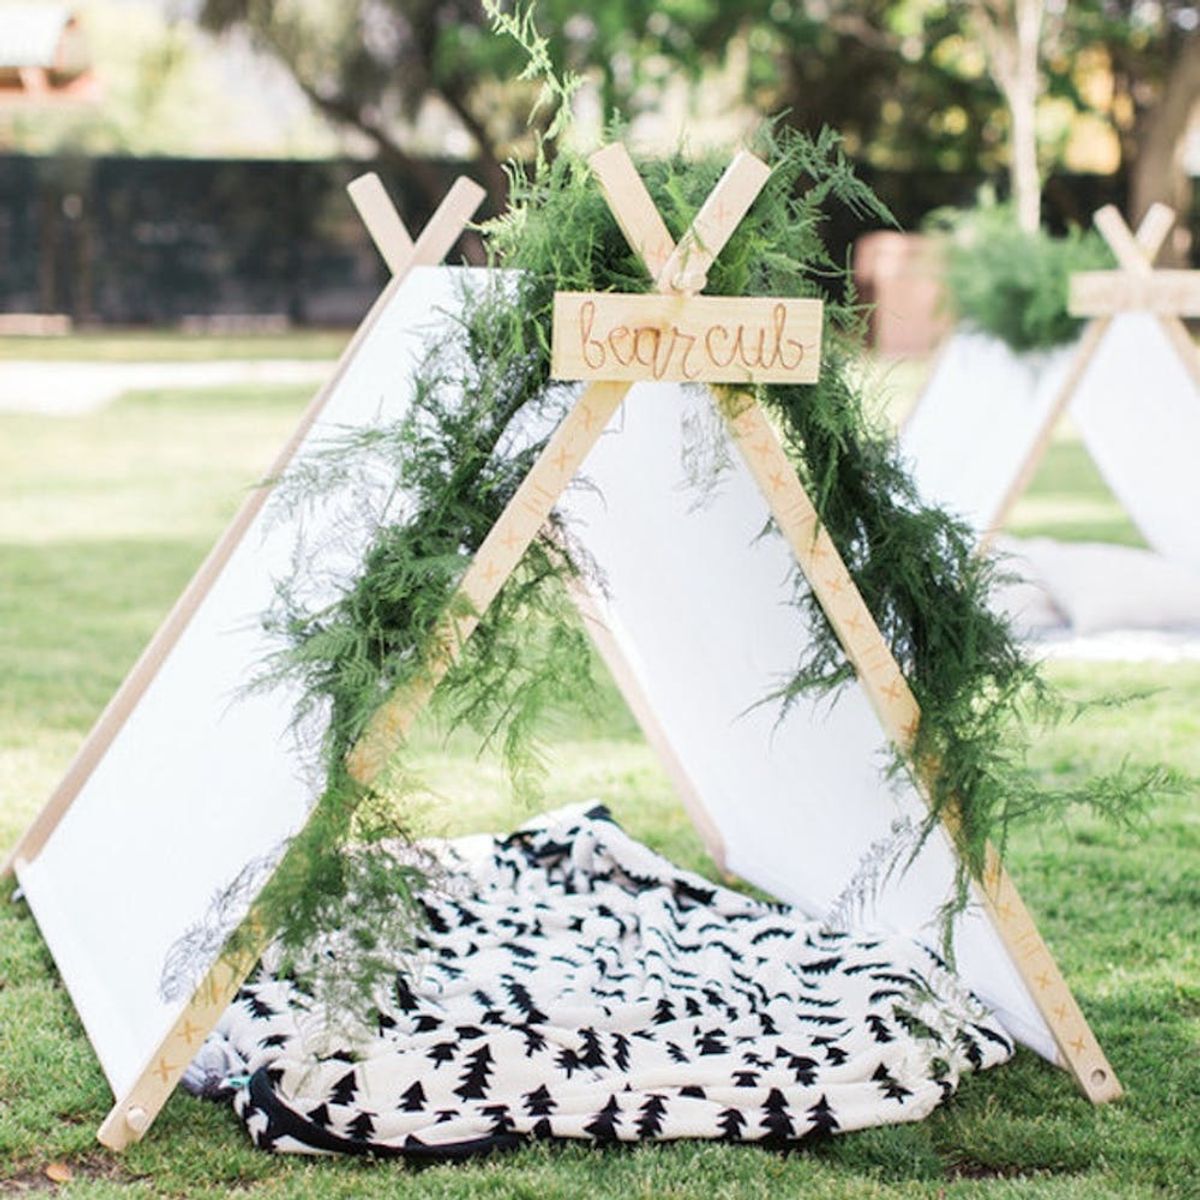 17 Ideas for Throwing an Adorable Camping Themed Kids Birthday Party